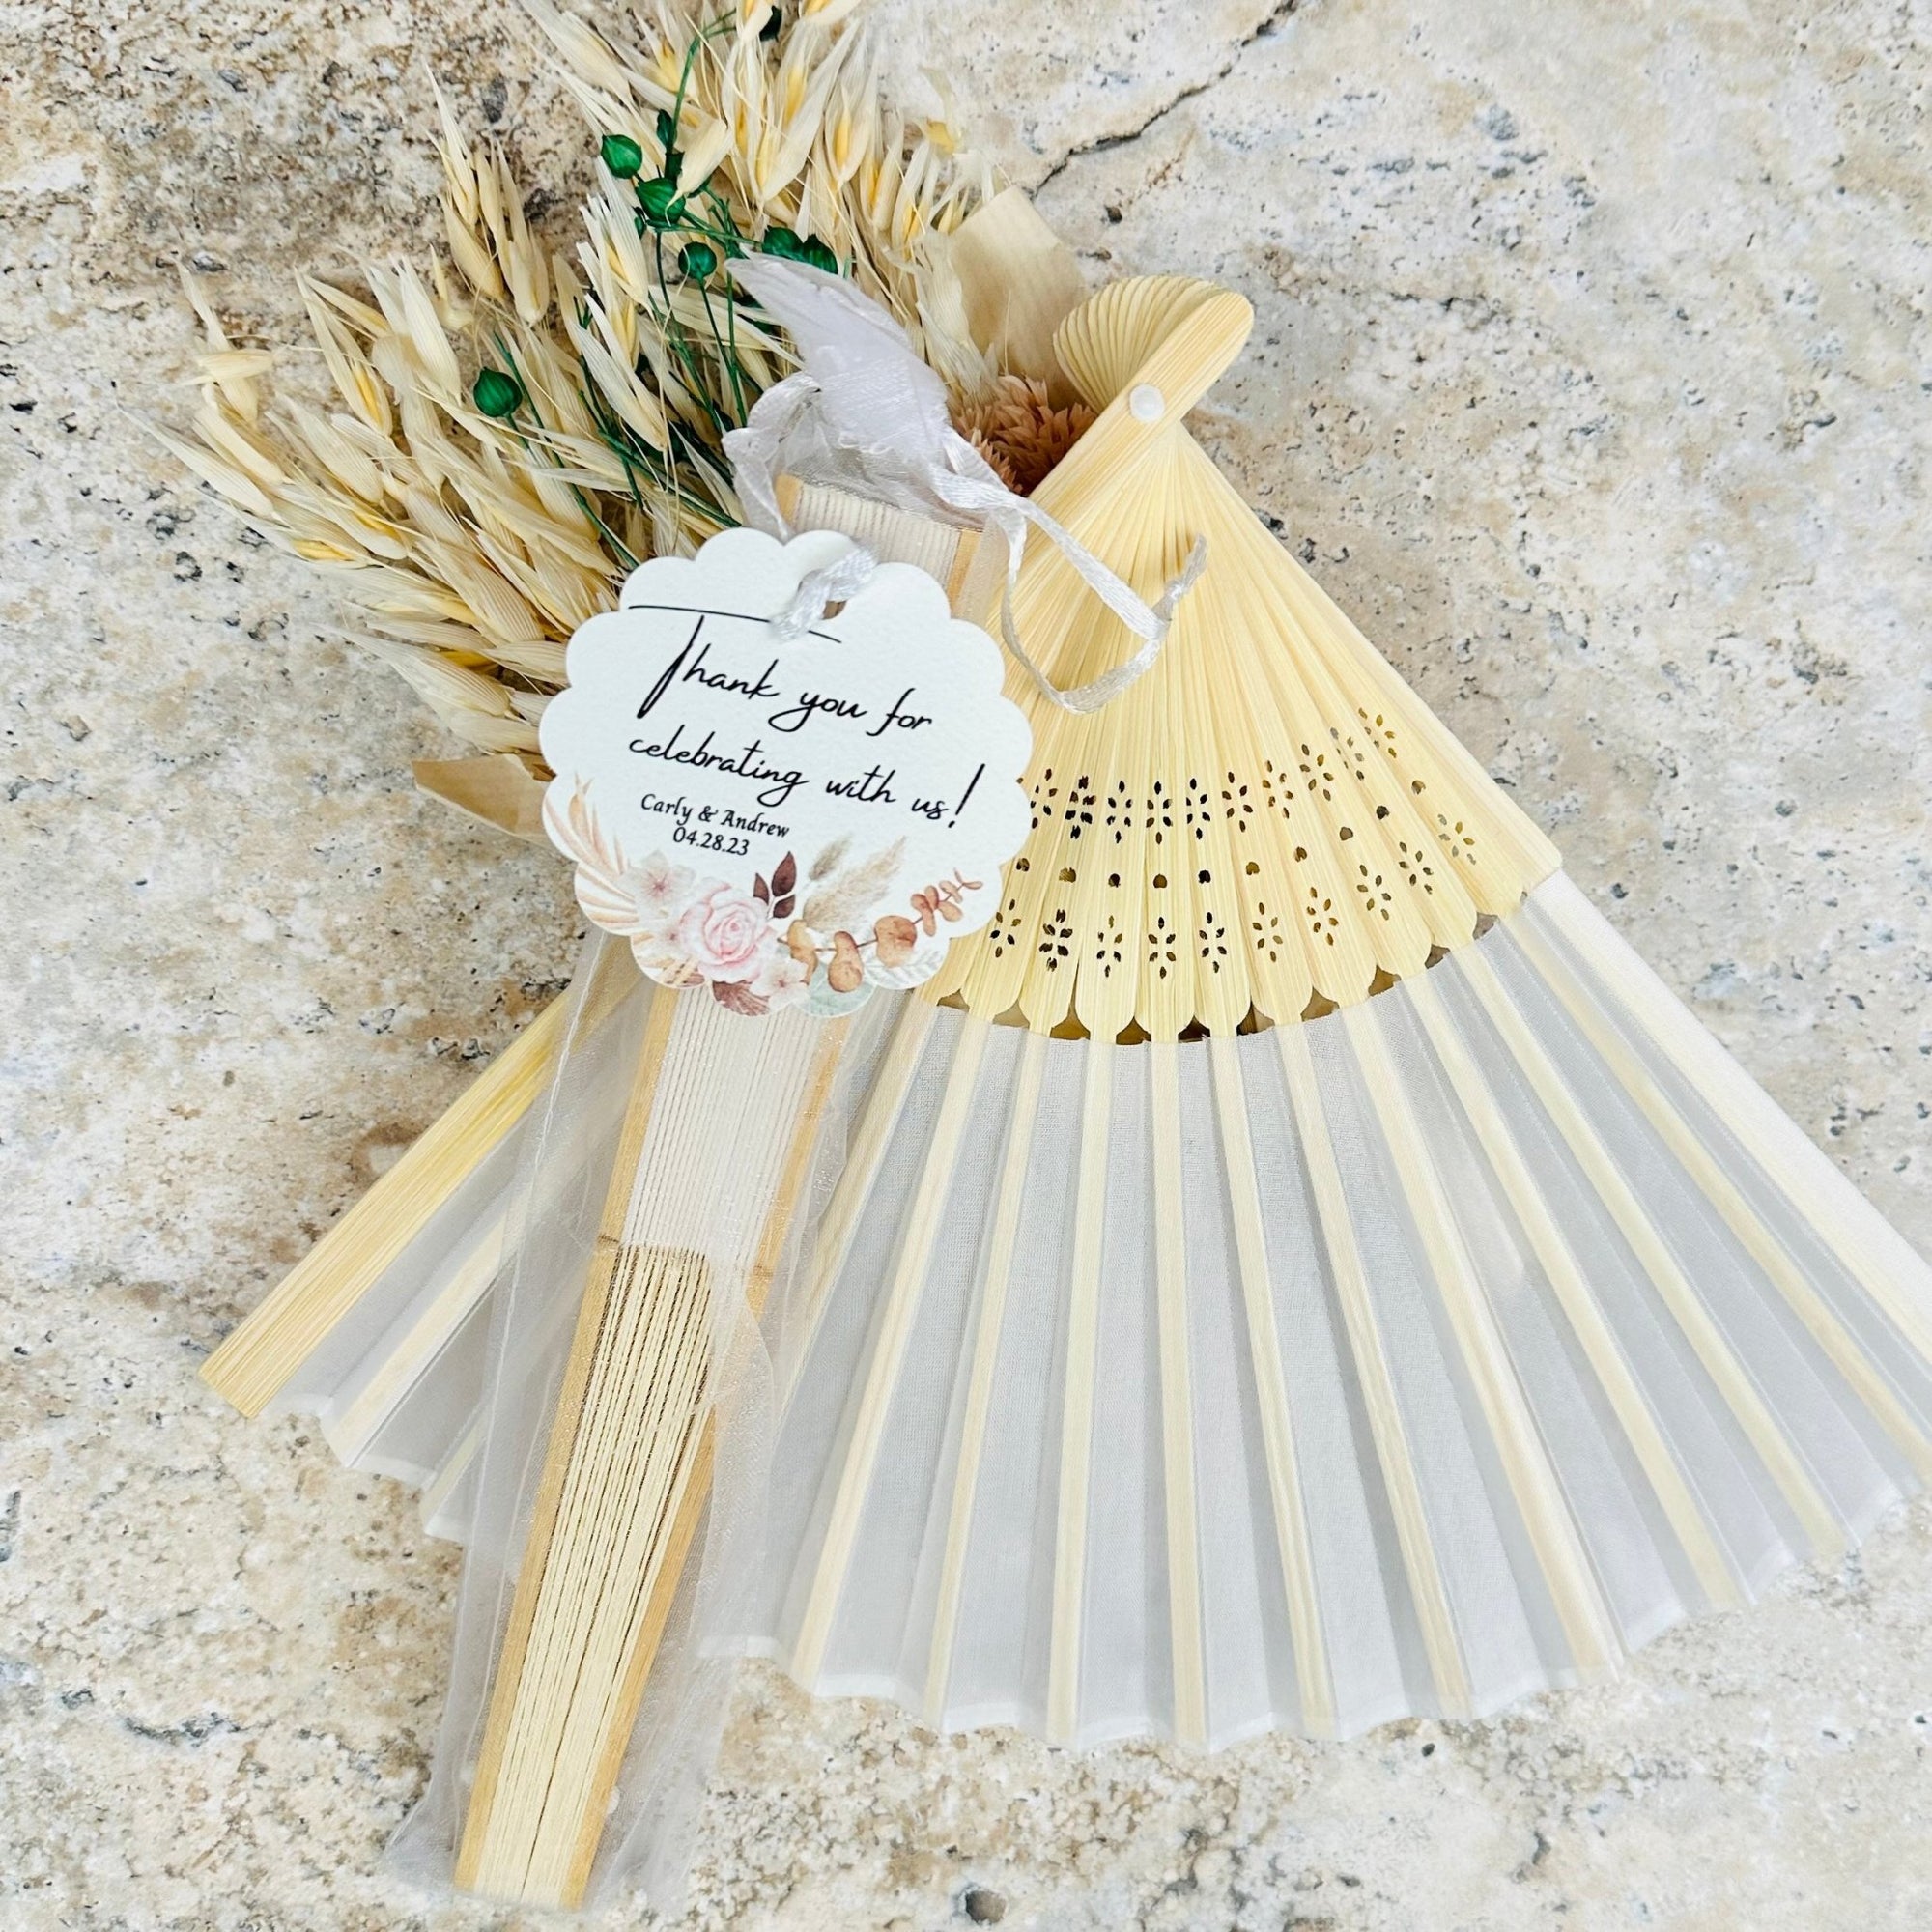 Provided wedding fans for guests to stay cool during the ceremony